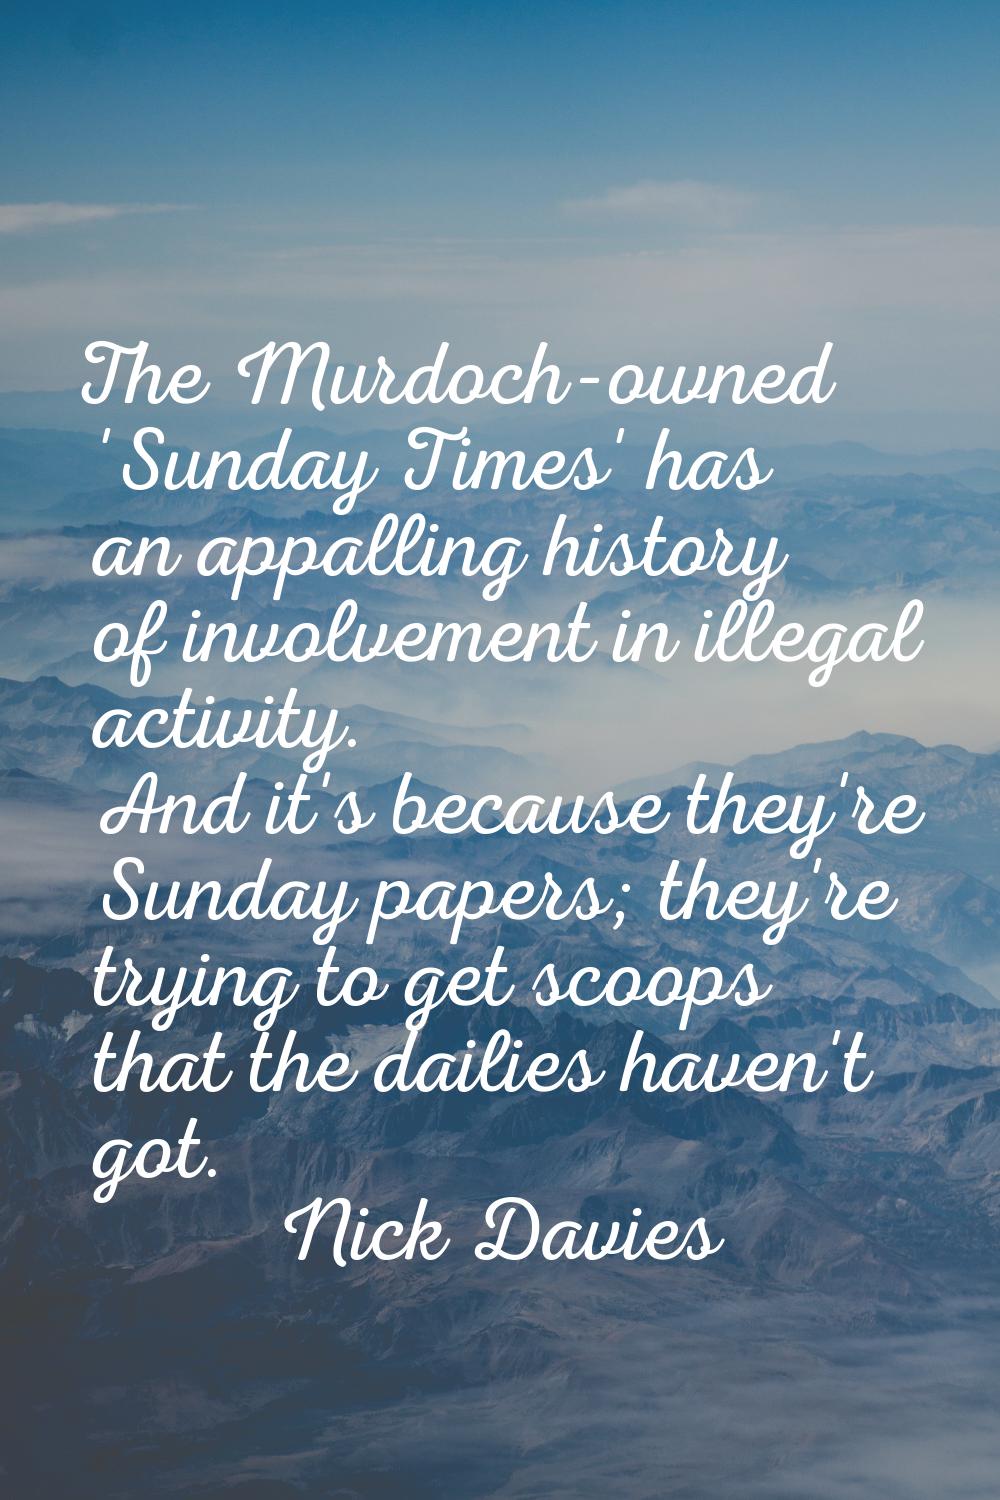 The Murdoch-owned 'Sunday Times' has an appalling history of involvement in illegal activity. And i